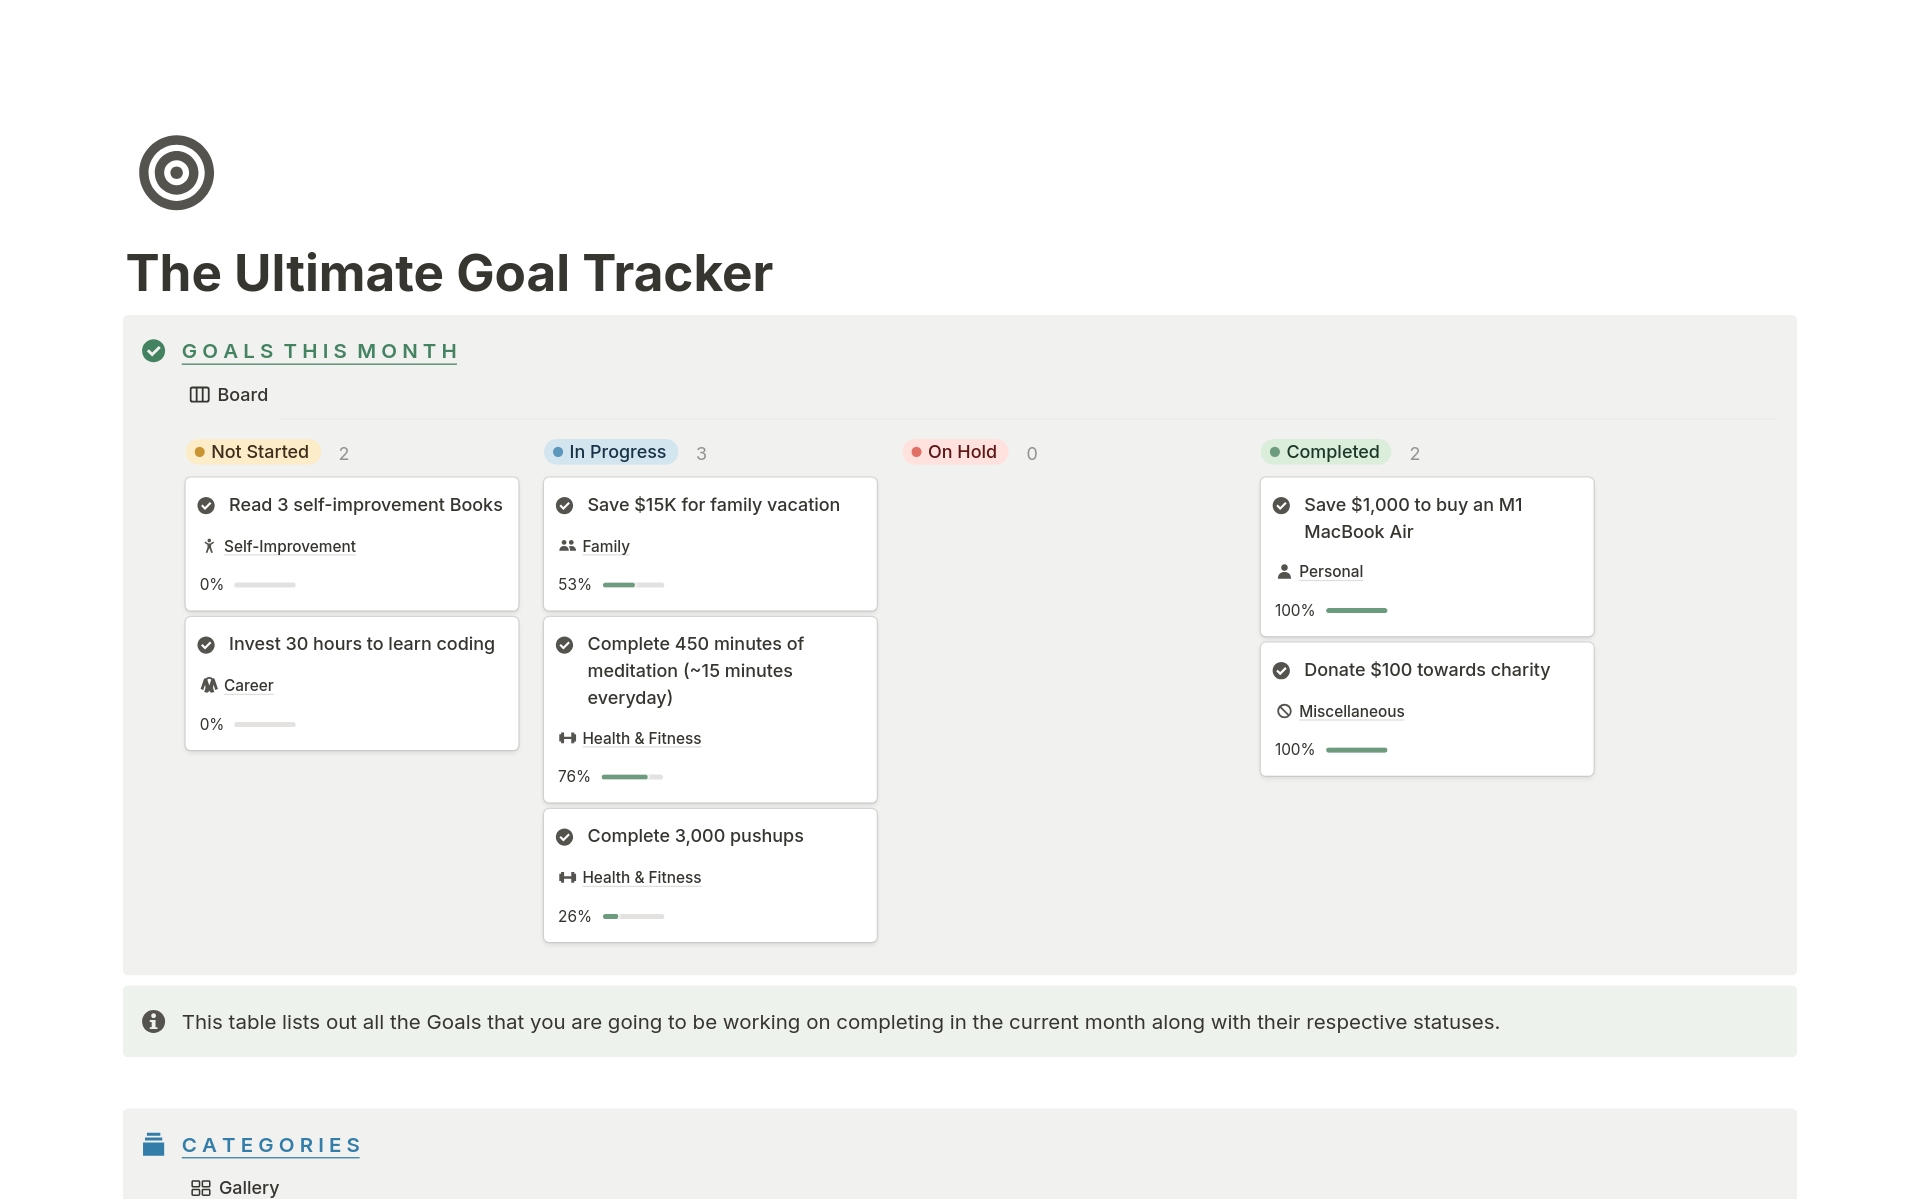 Track and manage all your Goals in a single place.